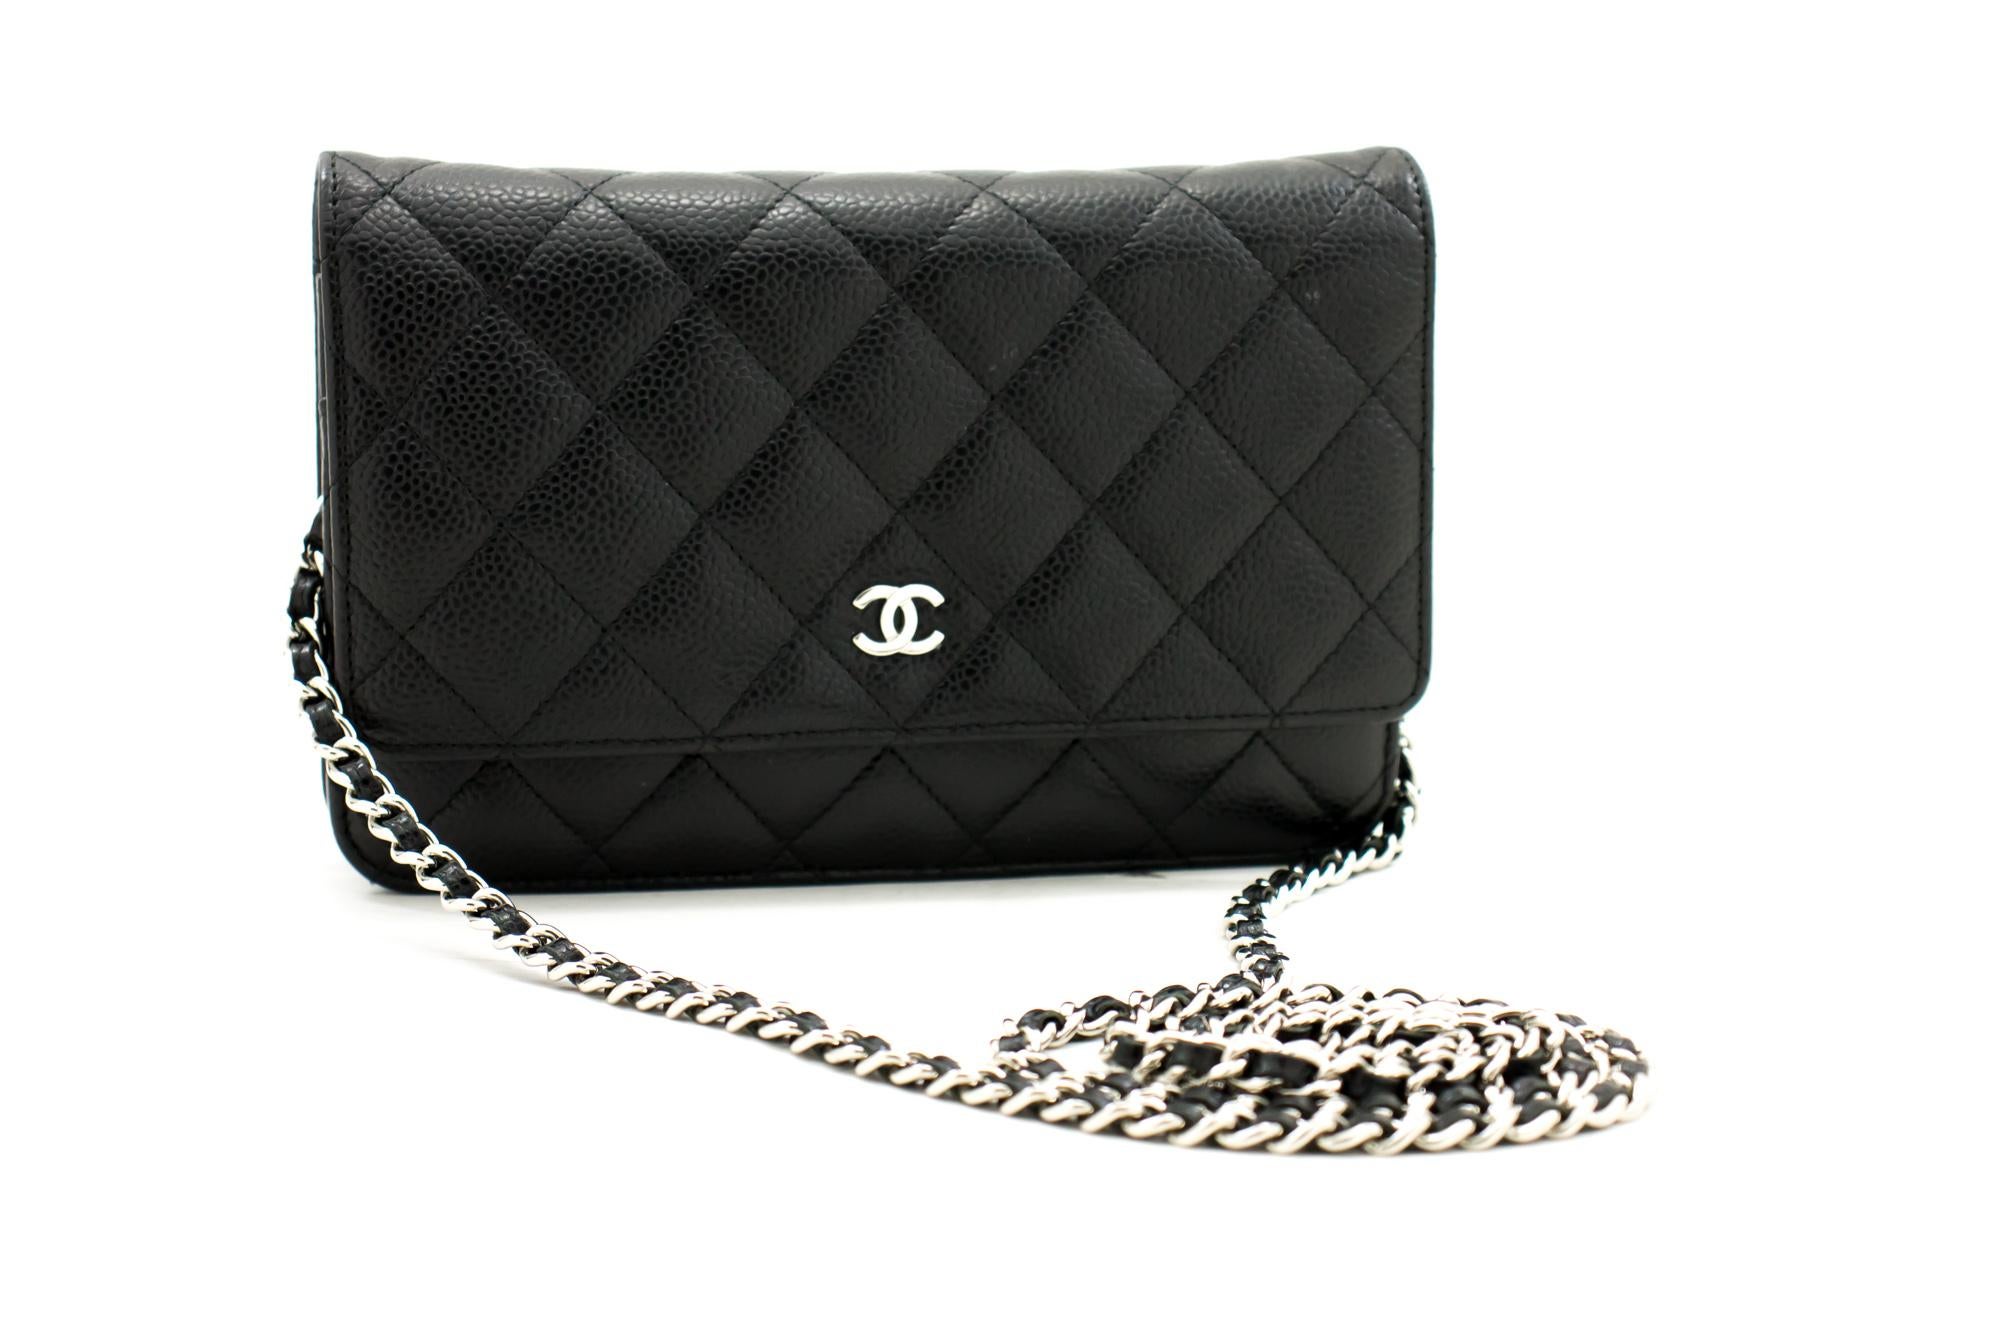 An authentic CHANEL Caviar Wallet On Chain WOC Black Shoulder Bag Crossbody. The color is Black. The outside material is Leather. The pattern is Solid. This item is Contemporary. The year of manufacture would be 2018.
Conditions & Ratings
Outside